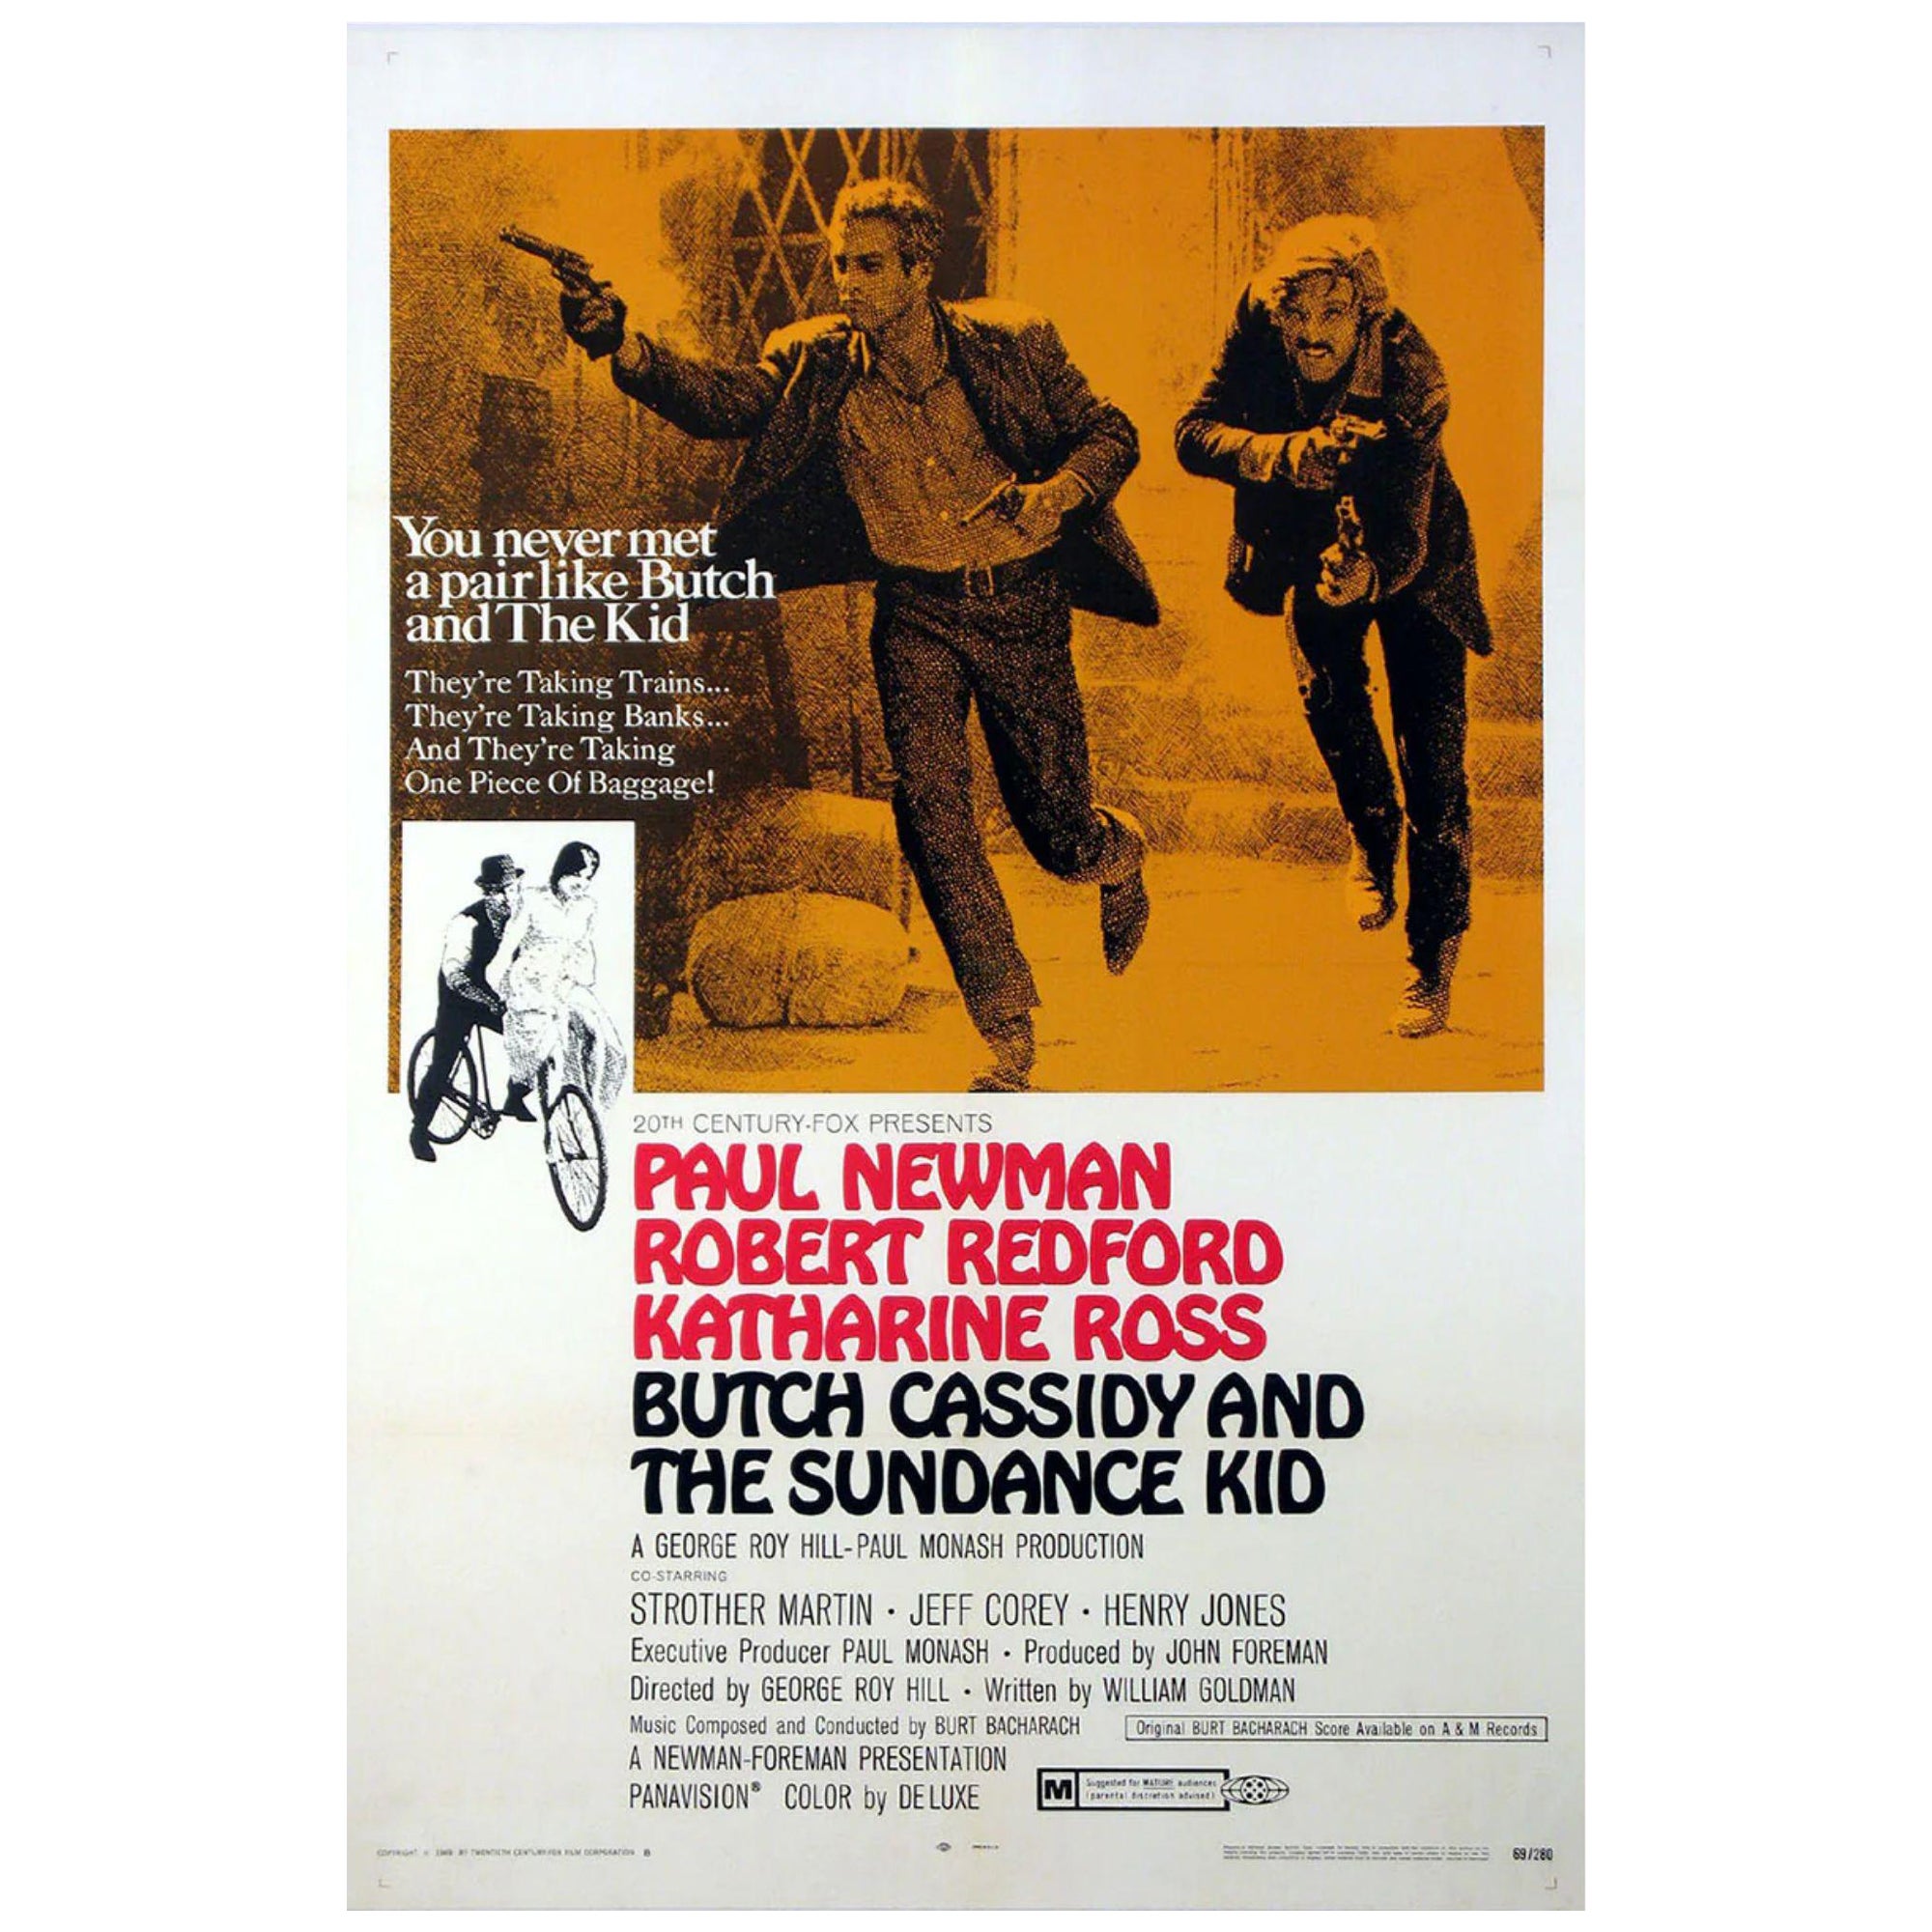 Butch Cassidy And The Sundance Kid, Unframed Poster, 1969 For Sale